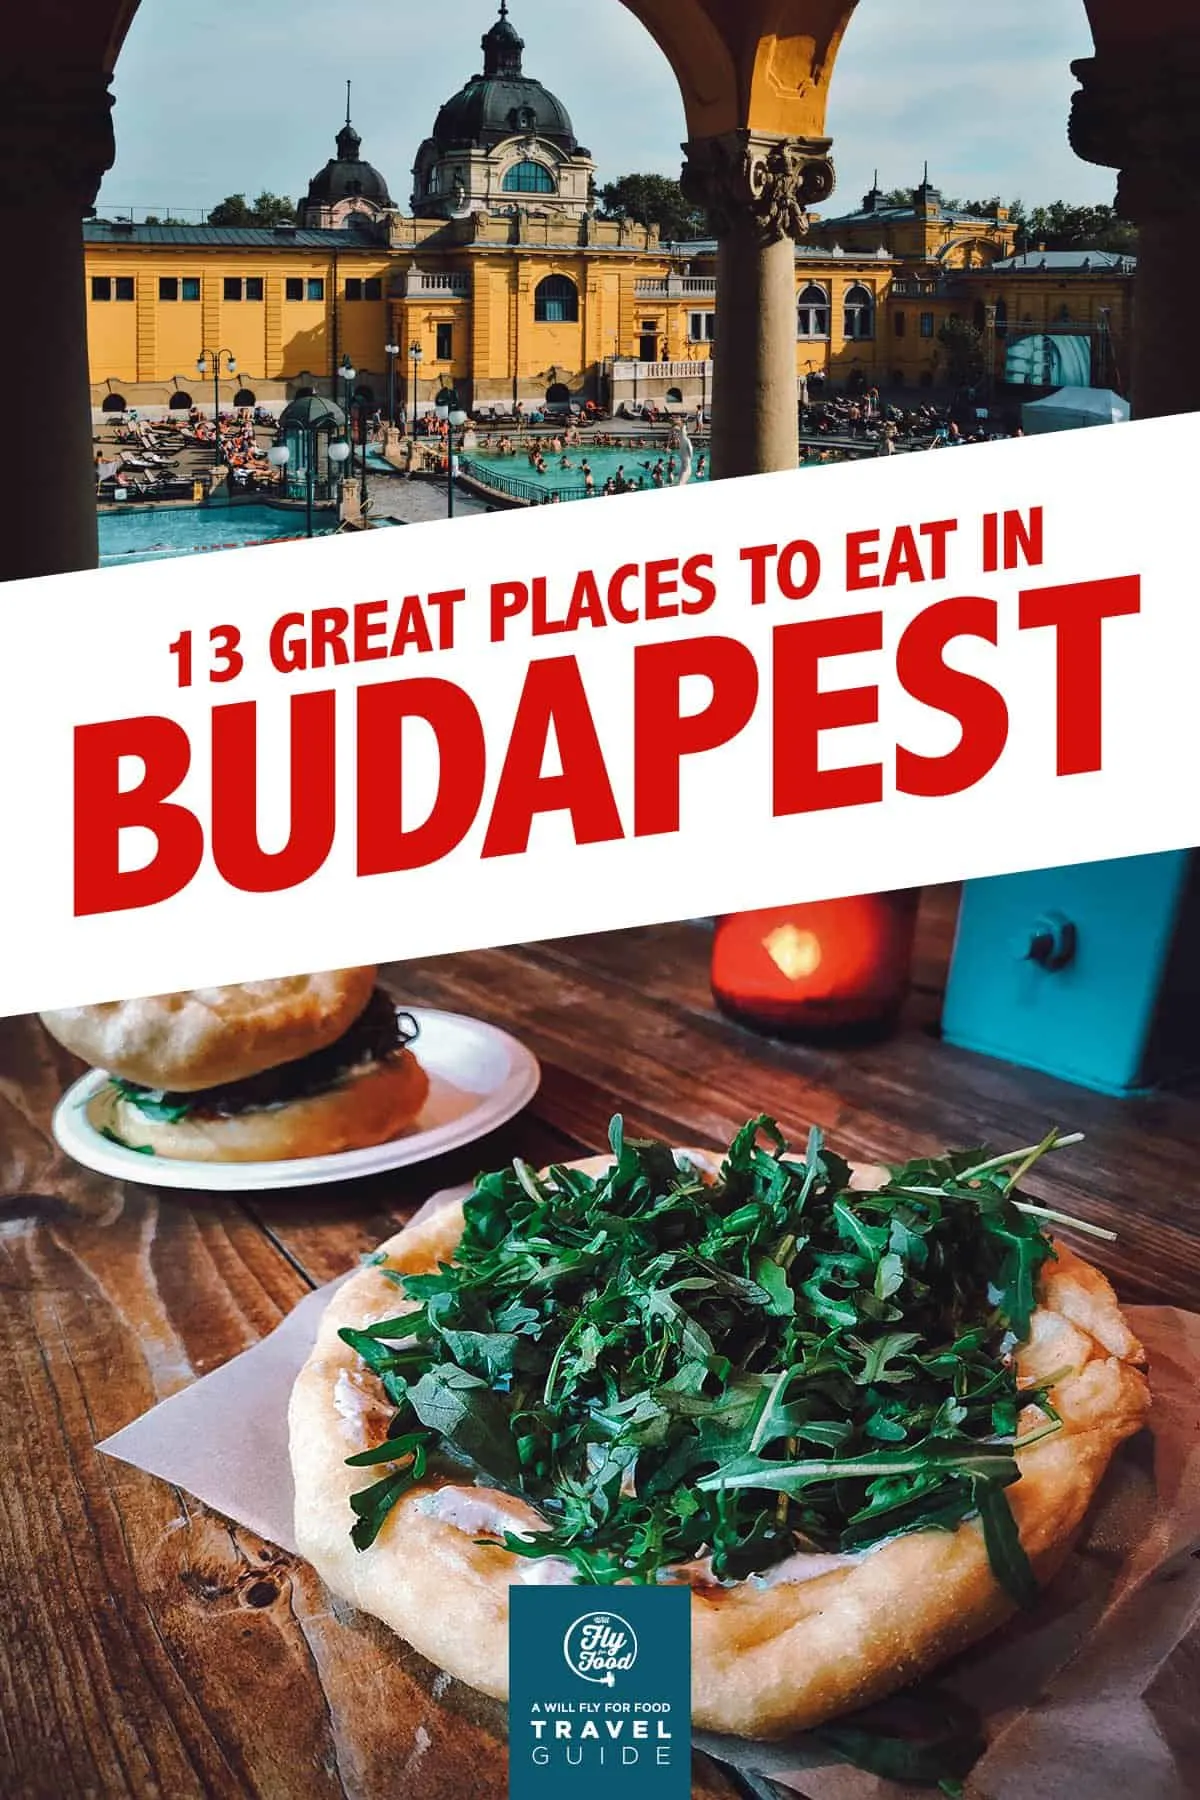 Szechenyi thermal baths and langos from one of the best street food restaurants in Budapest